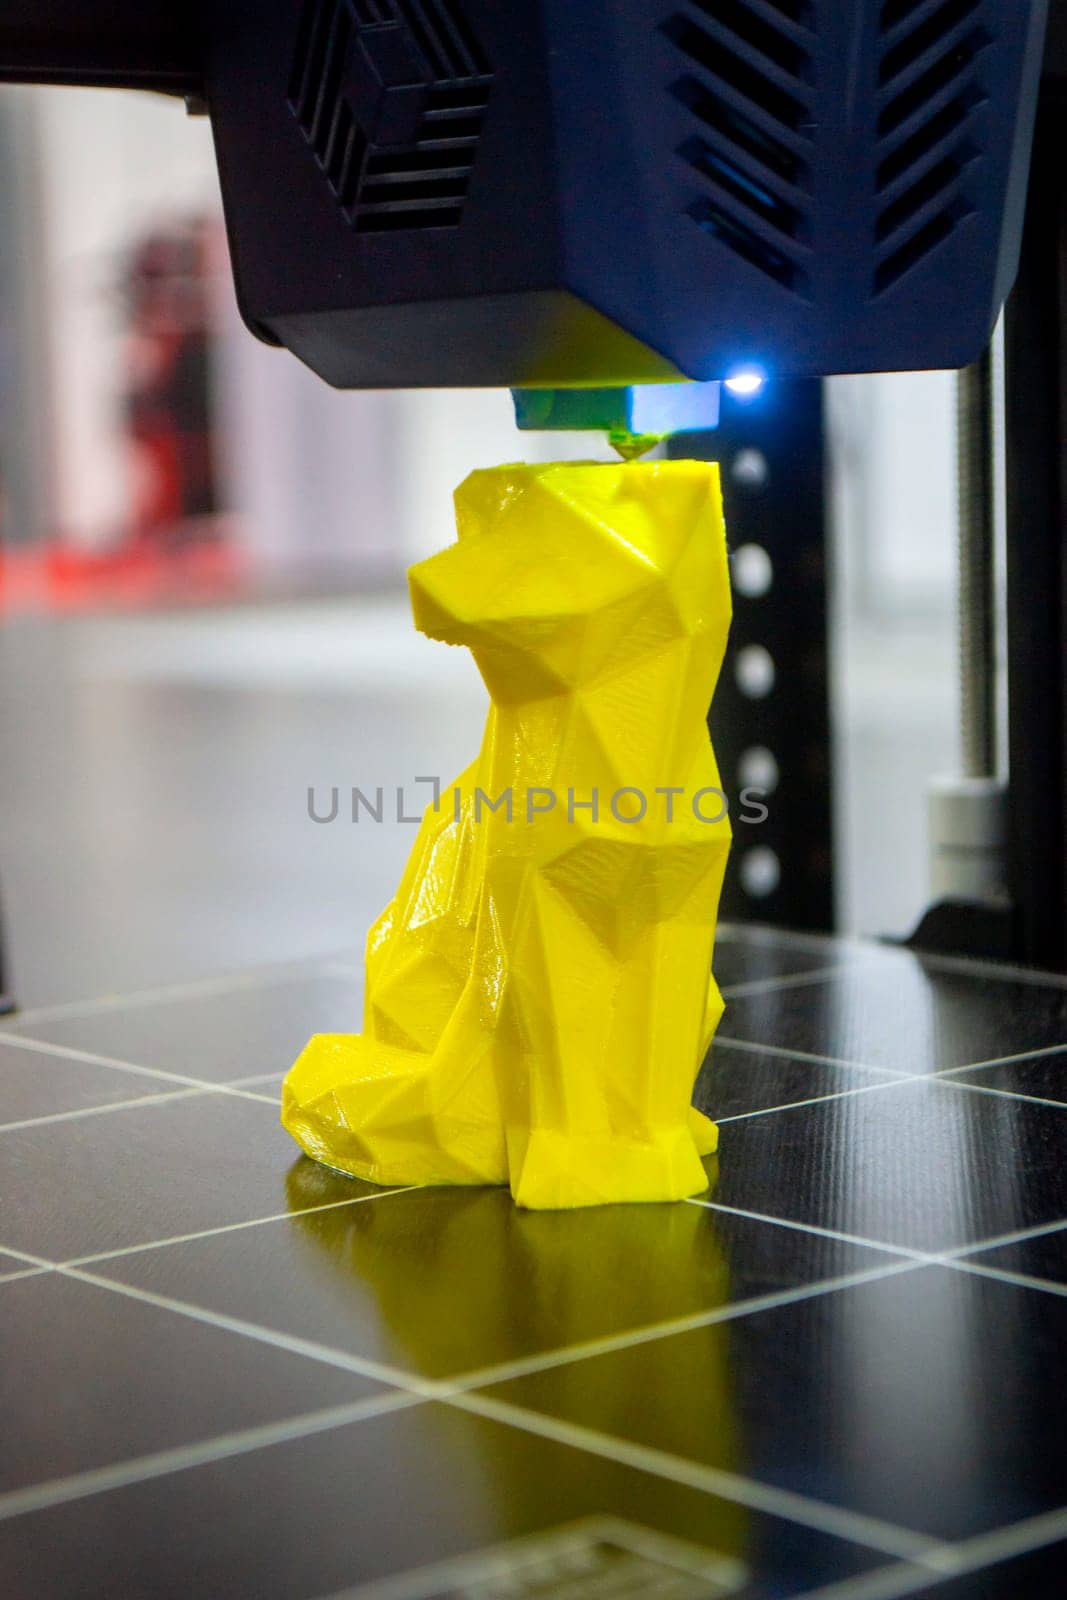 Abstract object printing on 3D printer with molten plastic close-up. 3D printer by Mari1408